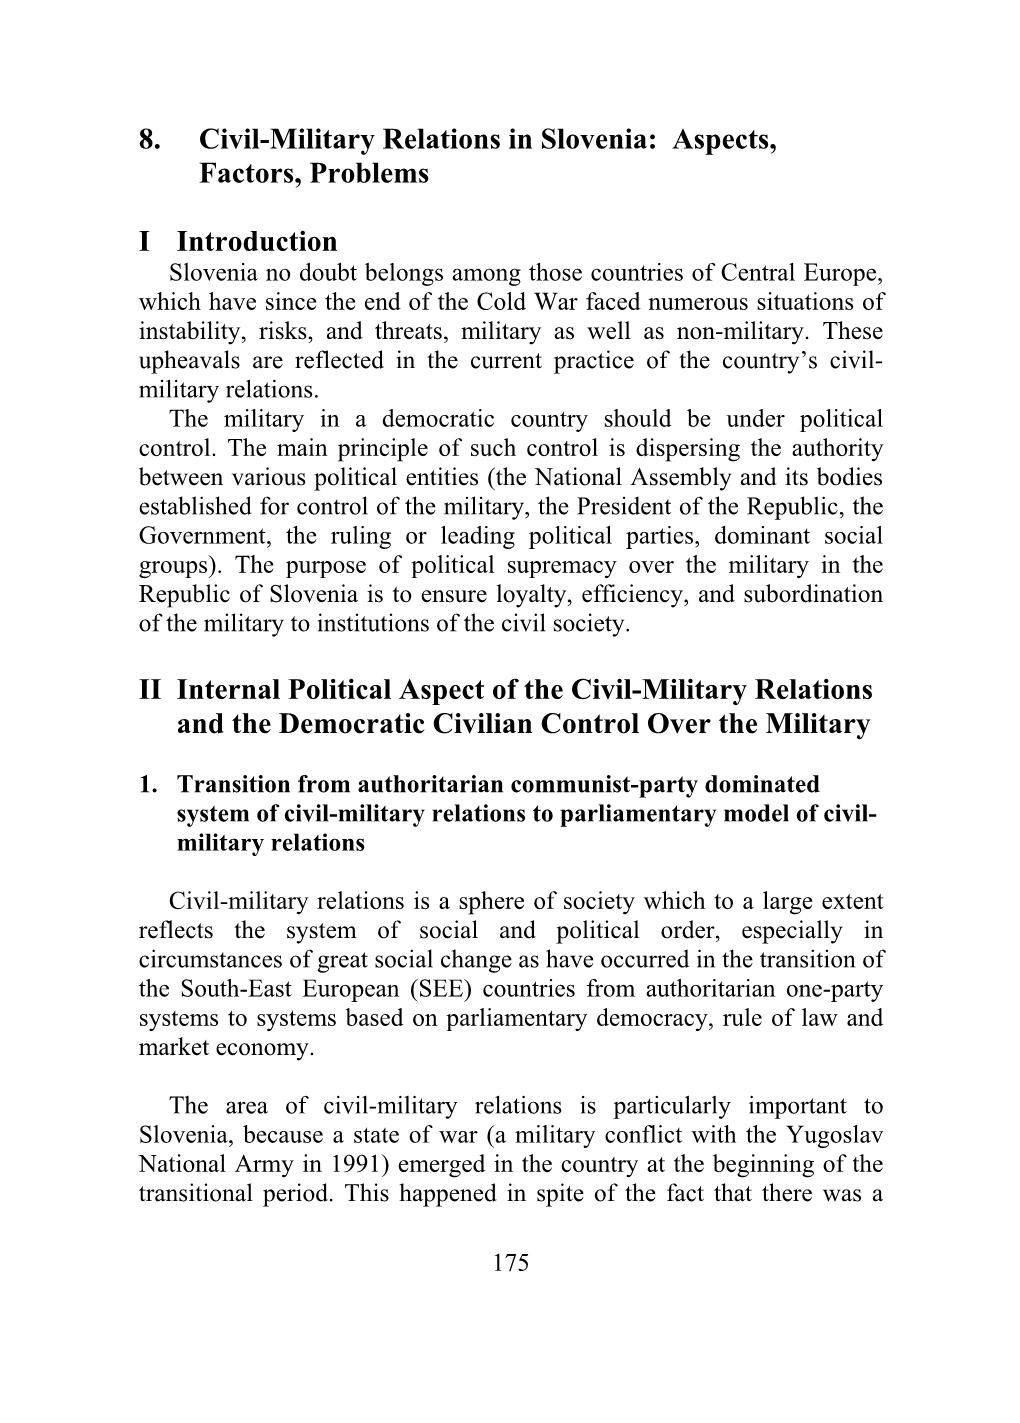 8. Civil-Military Relations in Slovenia: Aspects, Factors, Problems I